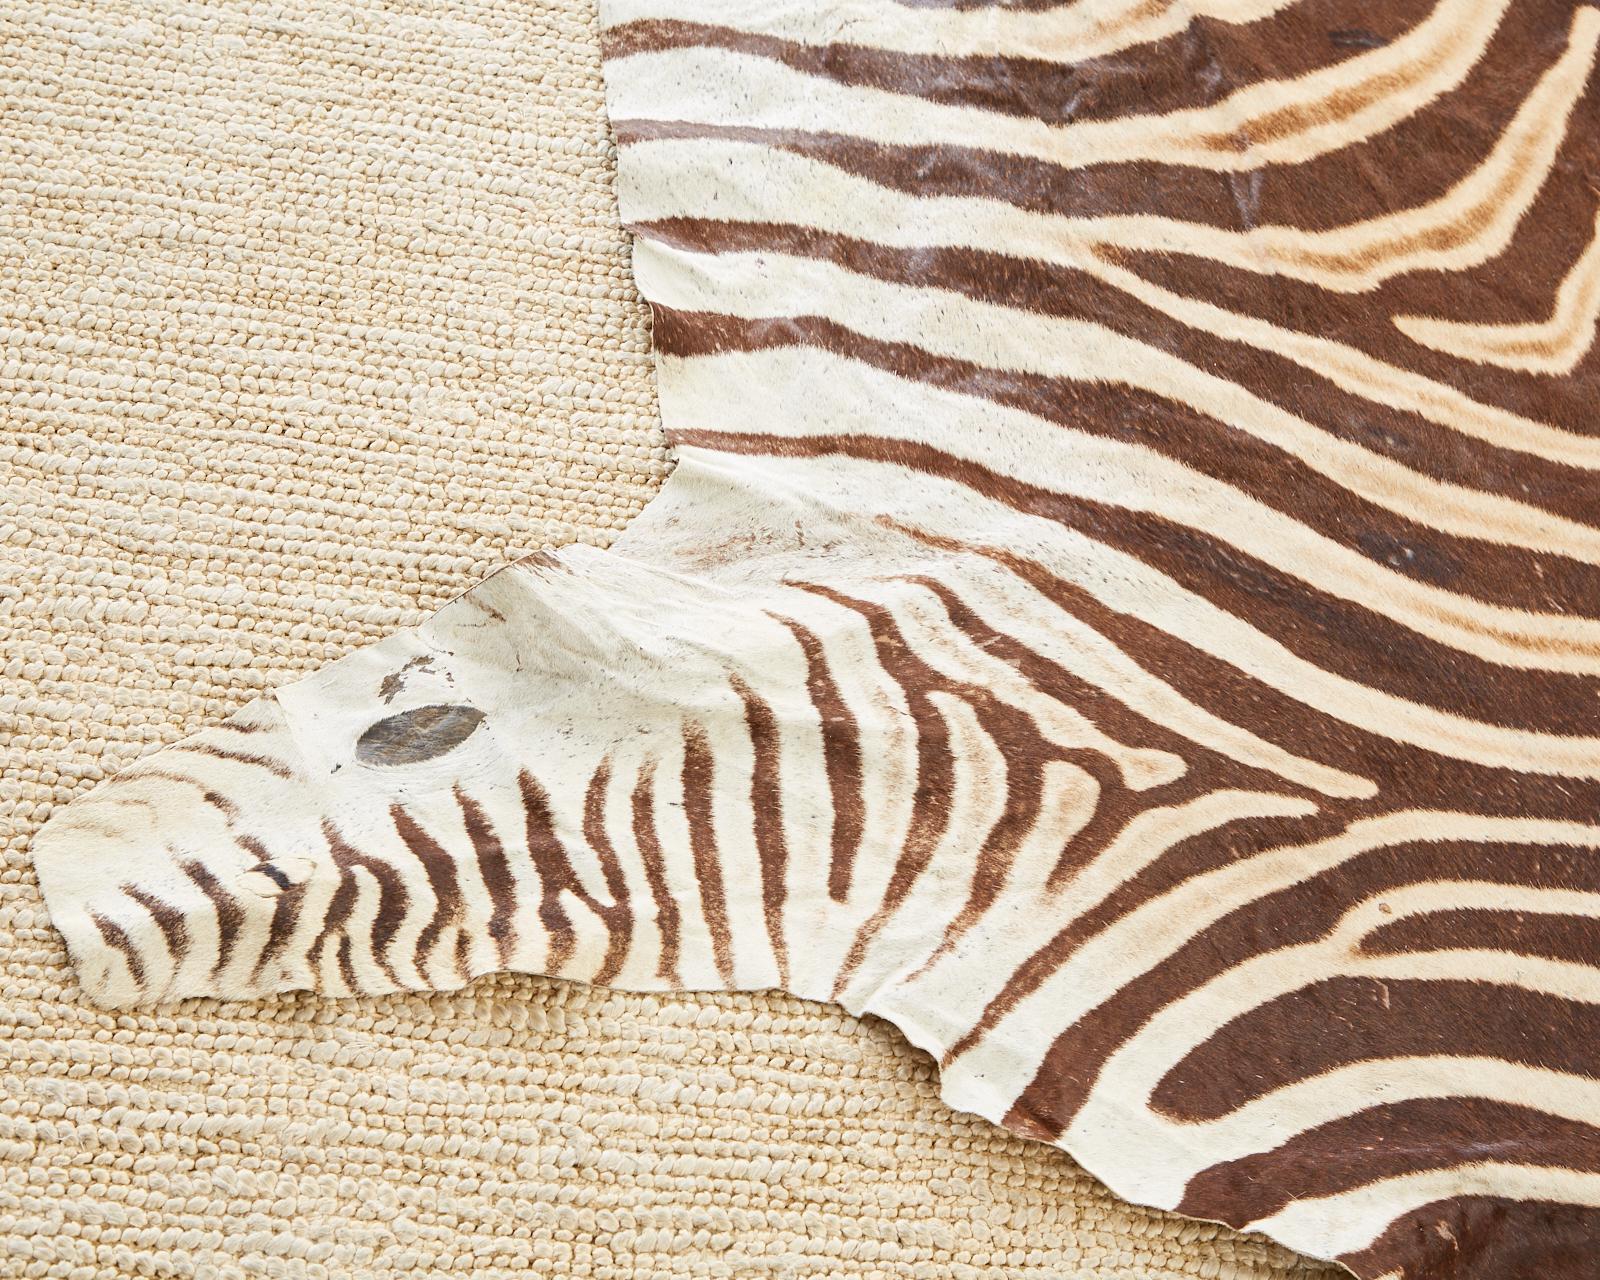 Hand-Crafted Authentic African Zebra Hide Carpet Rug